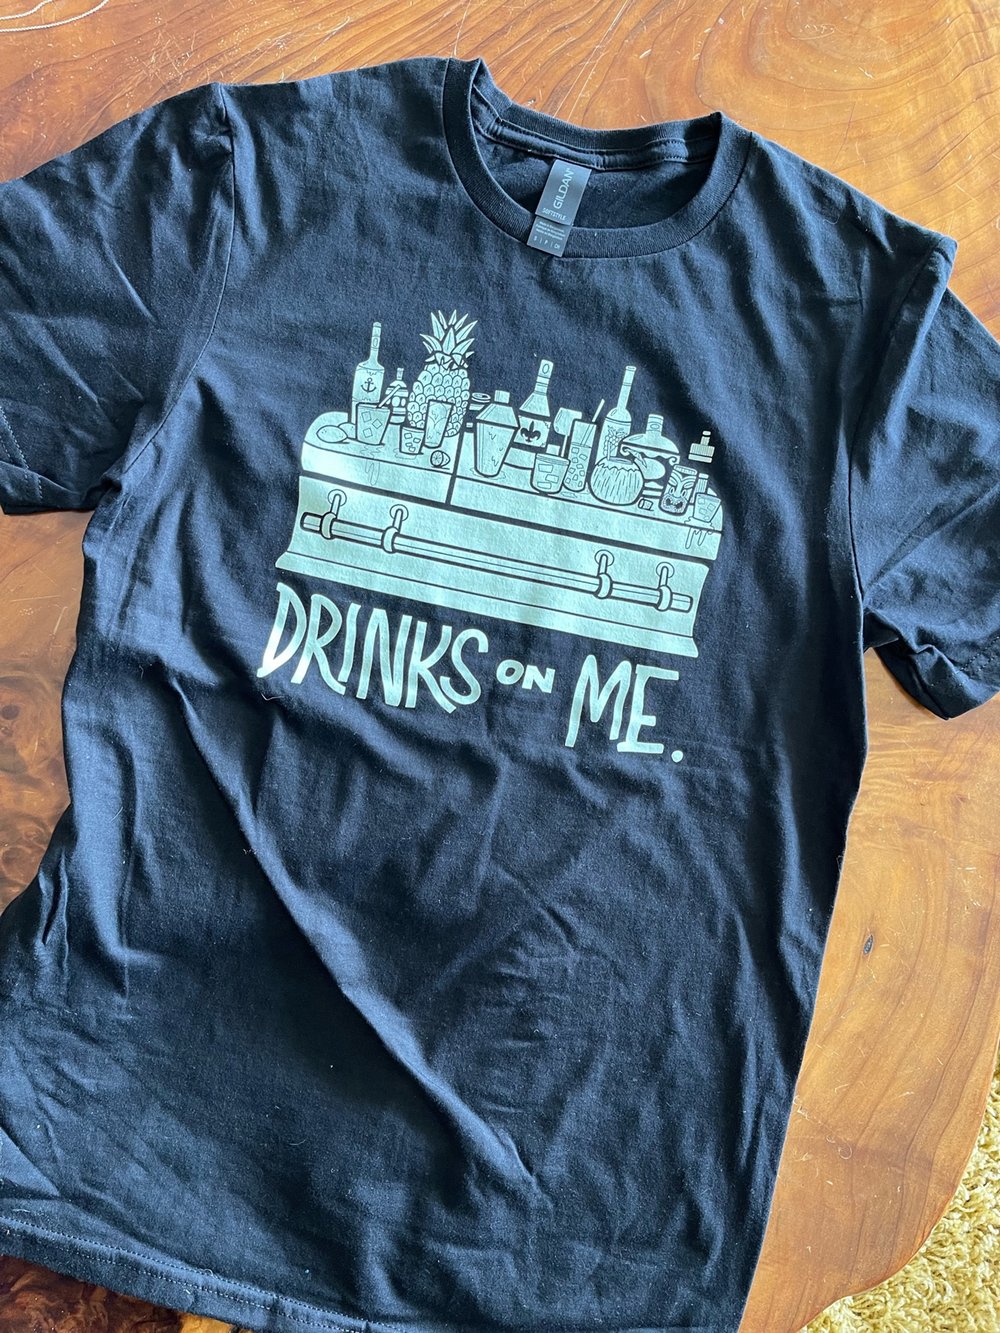 DRINKS ON ME Glow-in-the-Dark 100% Cotton T-Shirt